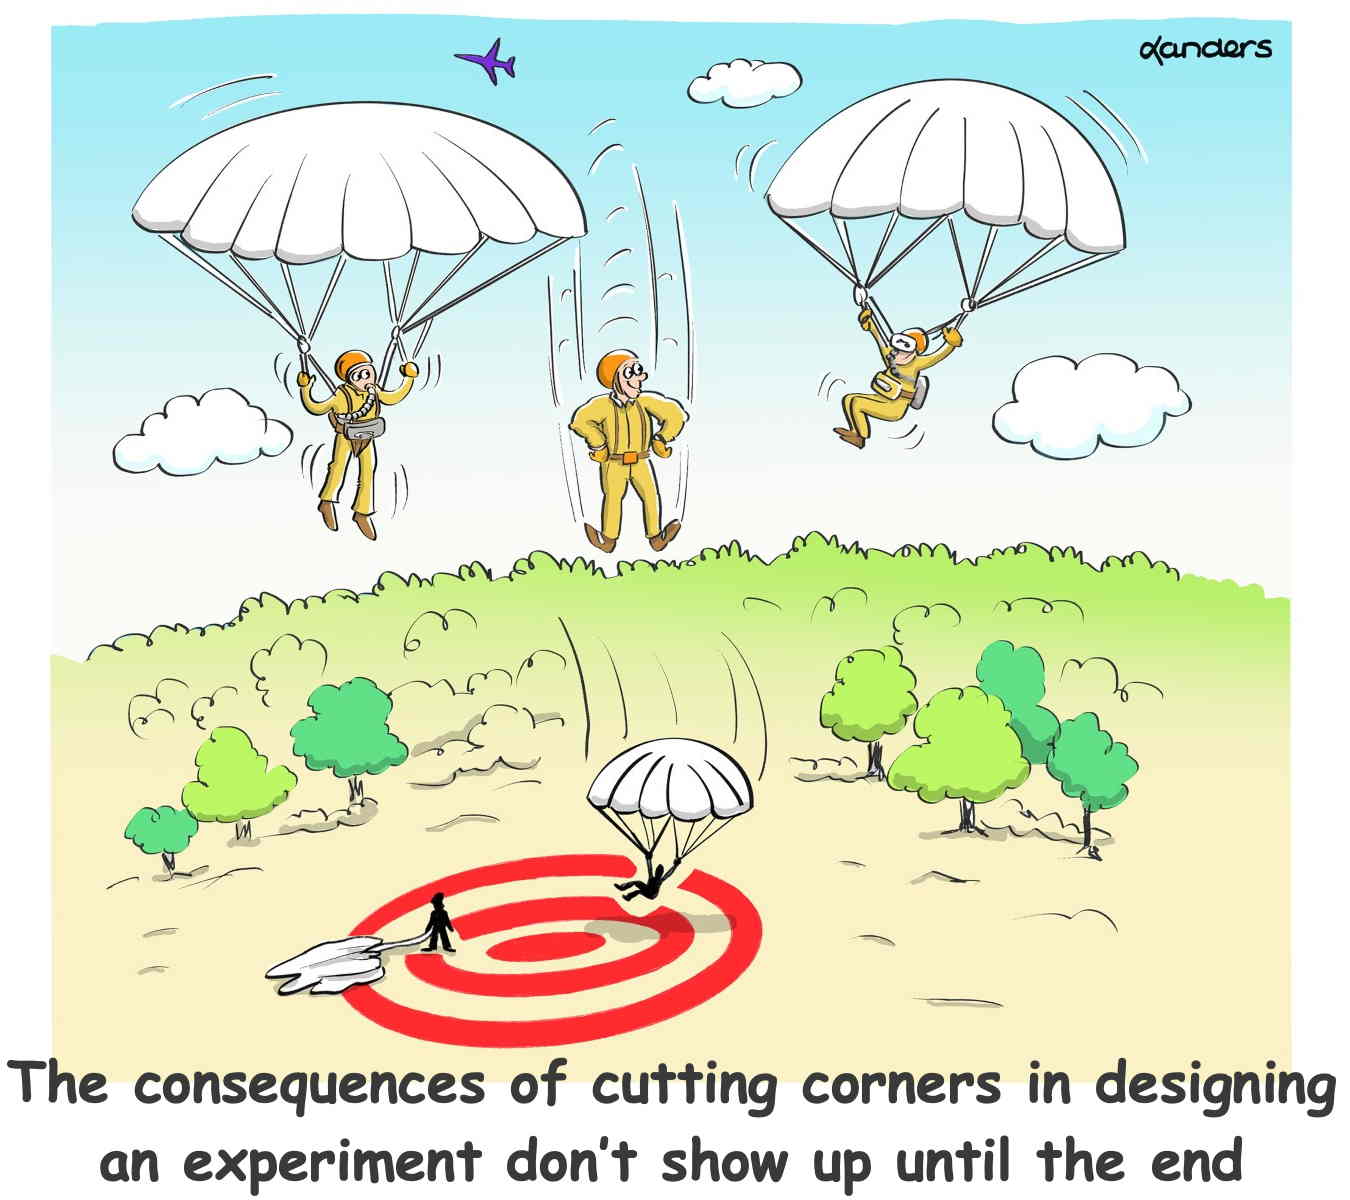 cartoon with people parachuting except one who is smiling but doesn't have a parachute. Caption says: The consequences of cutting corners in designing an experiment don't show up until the end